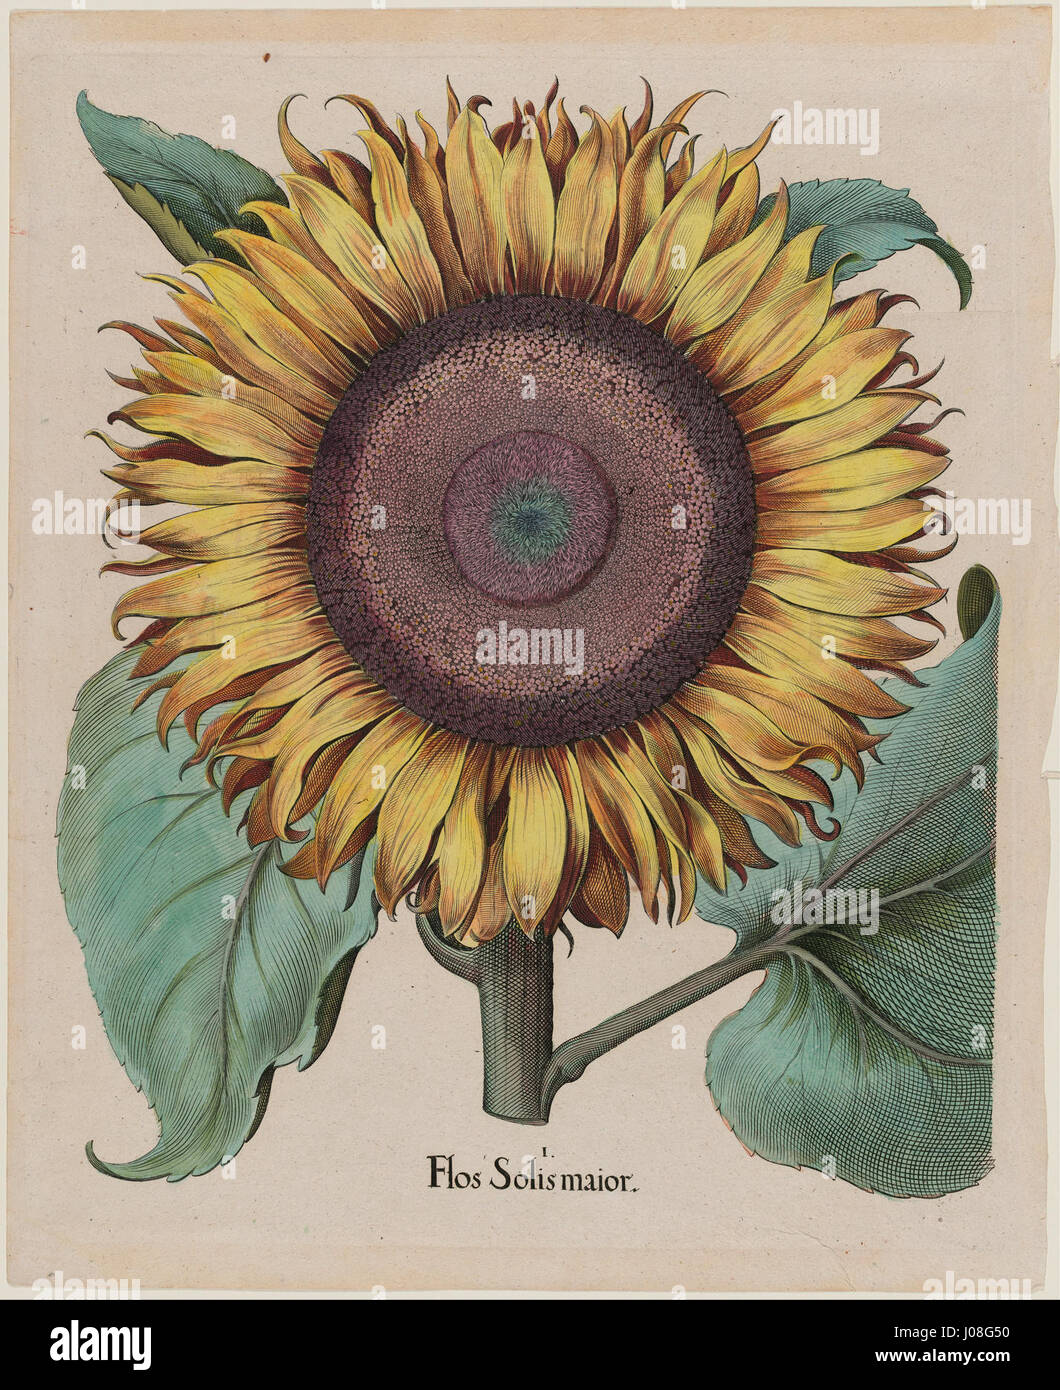 Unidentified artist - Large Sunflower (Flos Solis Maior), plate 1 from part 5, B. Besler,  Hortus Eystettensis , 1713 edit... - Stock Photo